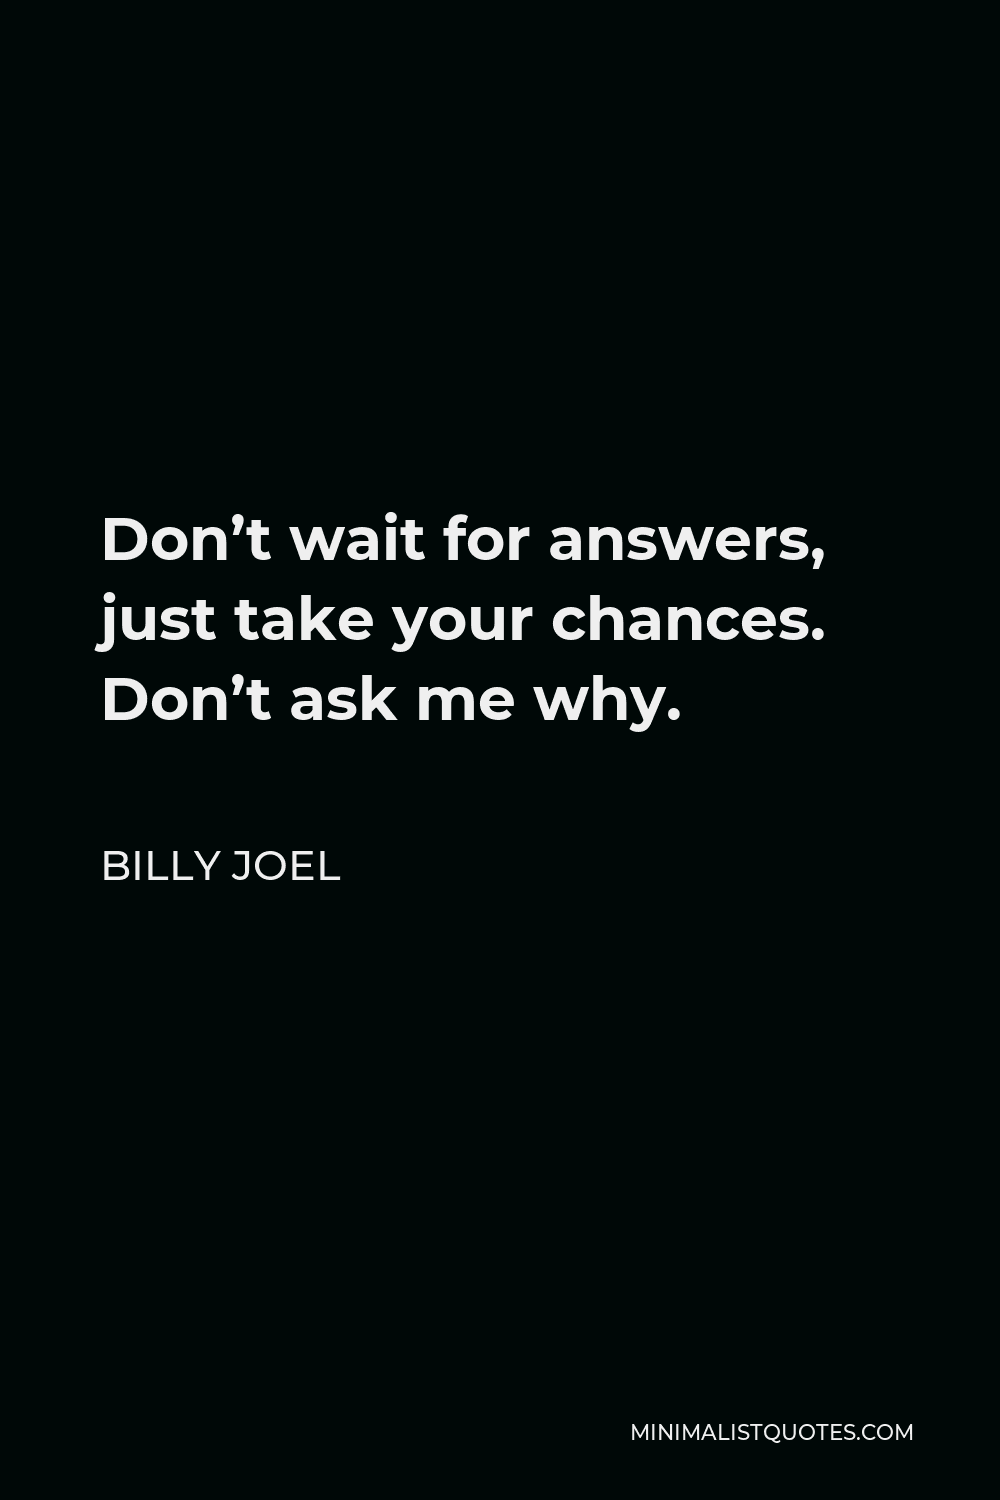 Billy Joel Quote - Don’t wait for answers, just take your chances. Don’t ask me why.